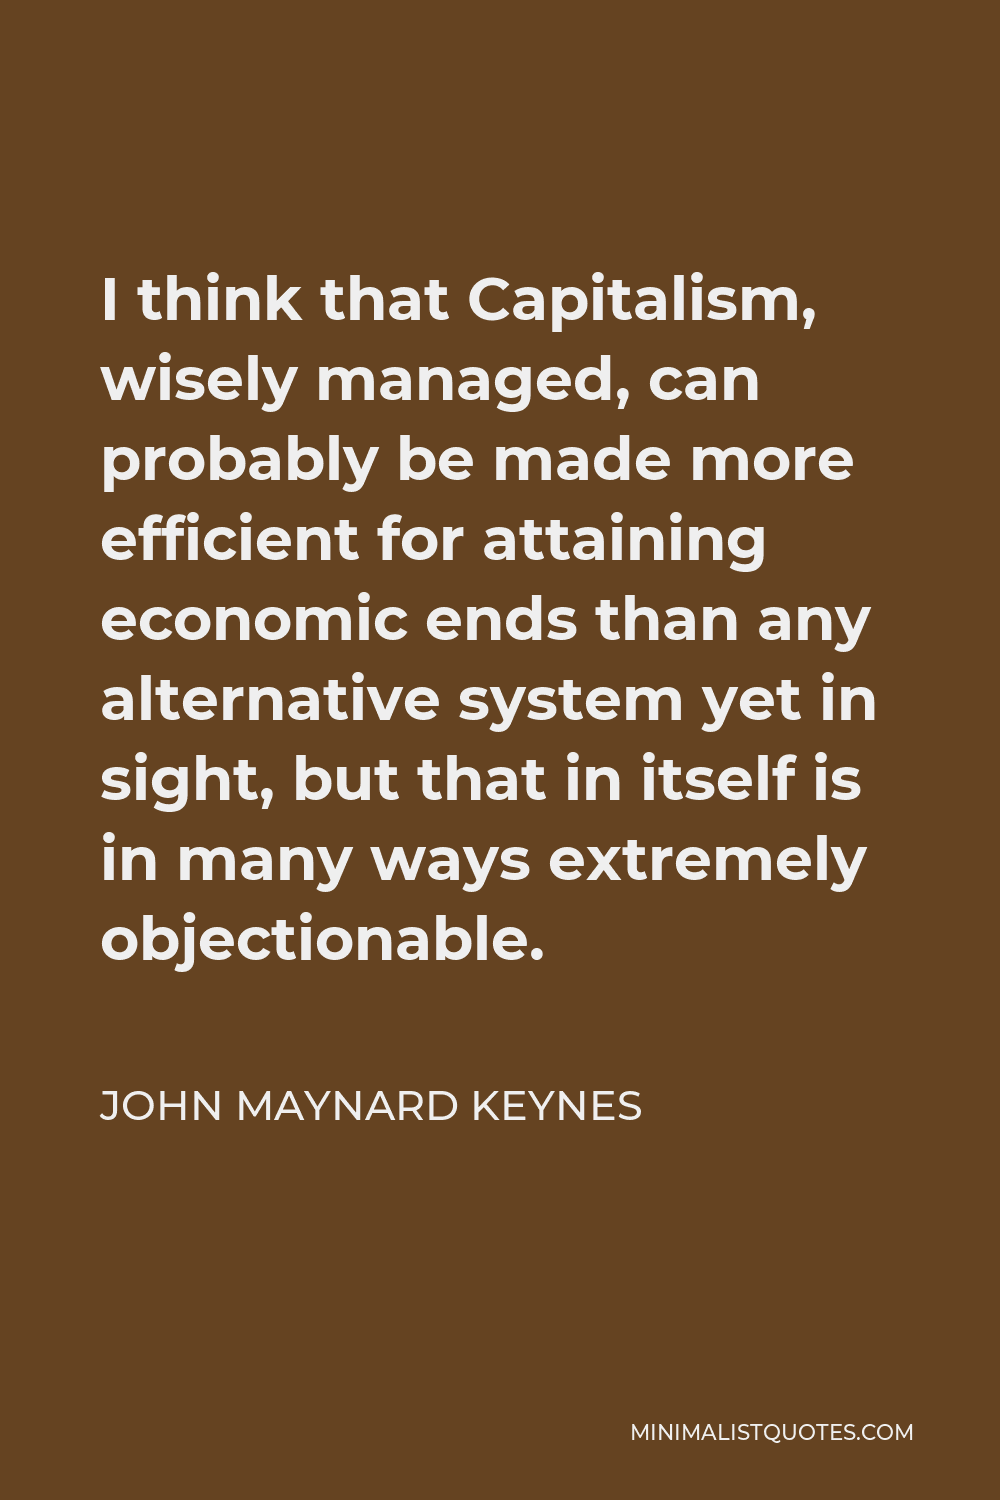 John Maynard Keynes Quote - I think that Capitalism, wisely managed, can probably be made more efficient for attaining economic ends than any alternative system yet in sight, but that in itself is in many ways extremely objectionable.